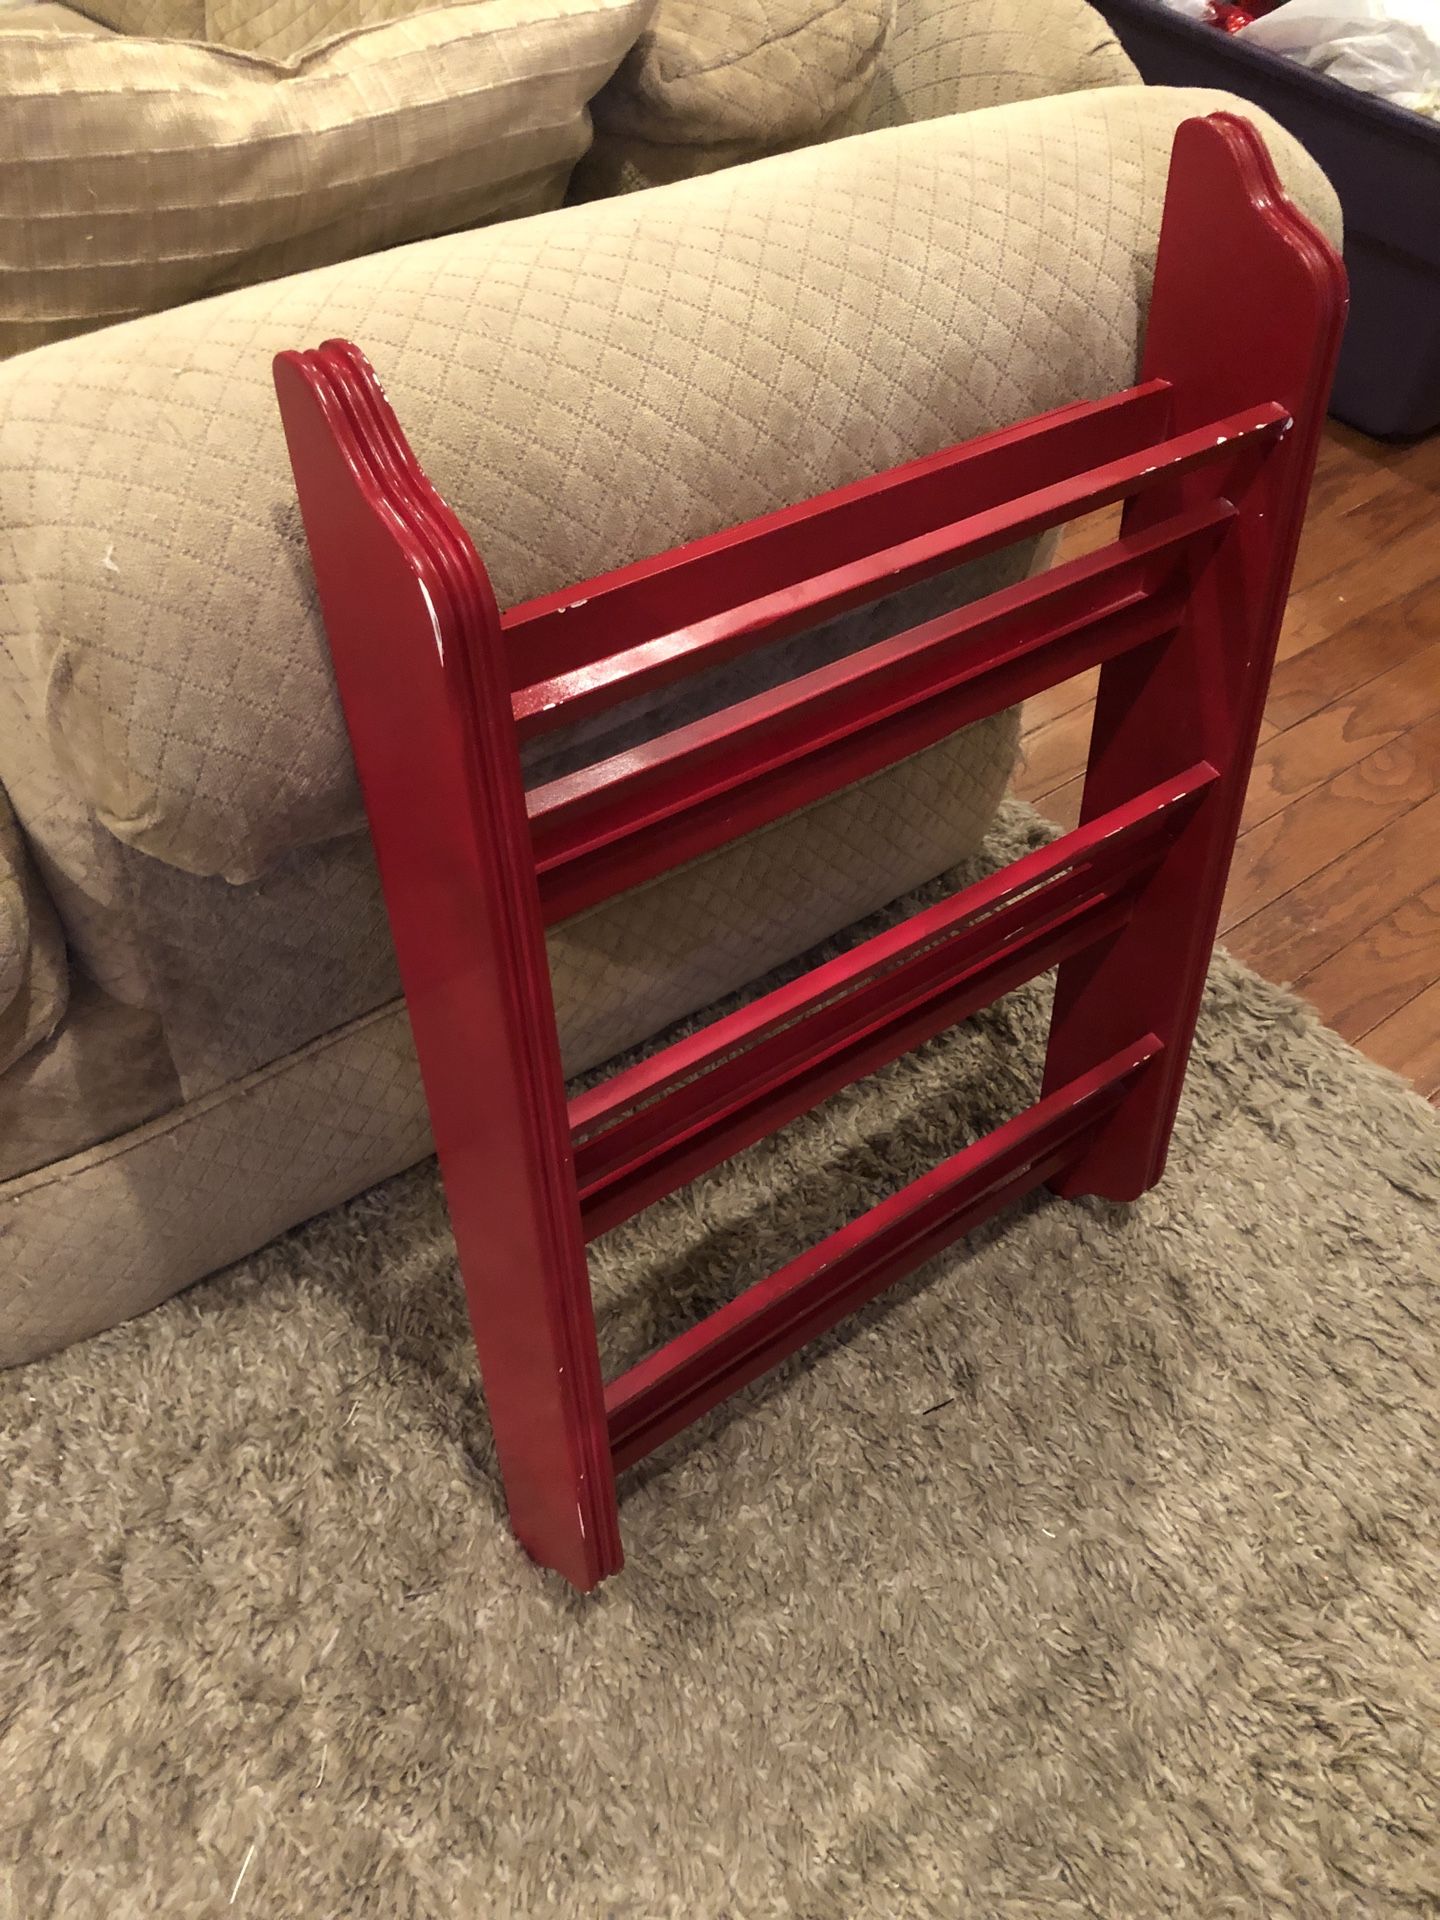 Pottery Barn Fire Engine Red Book / Magazing Rack Holder